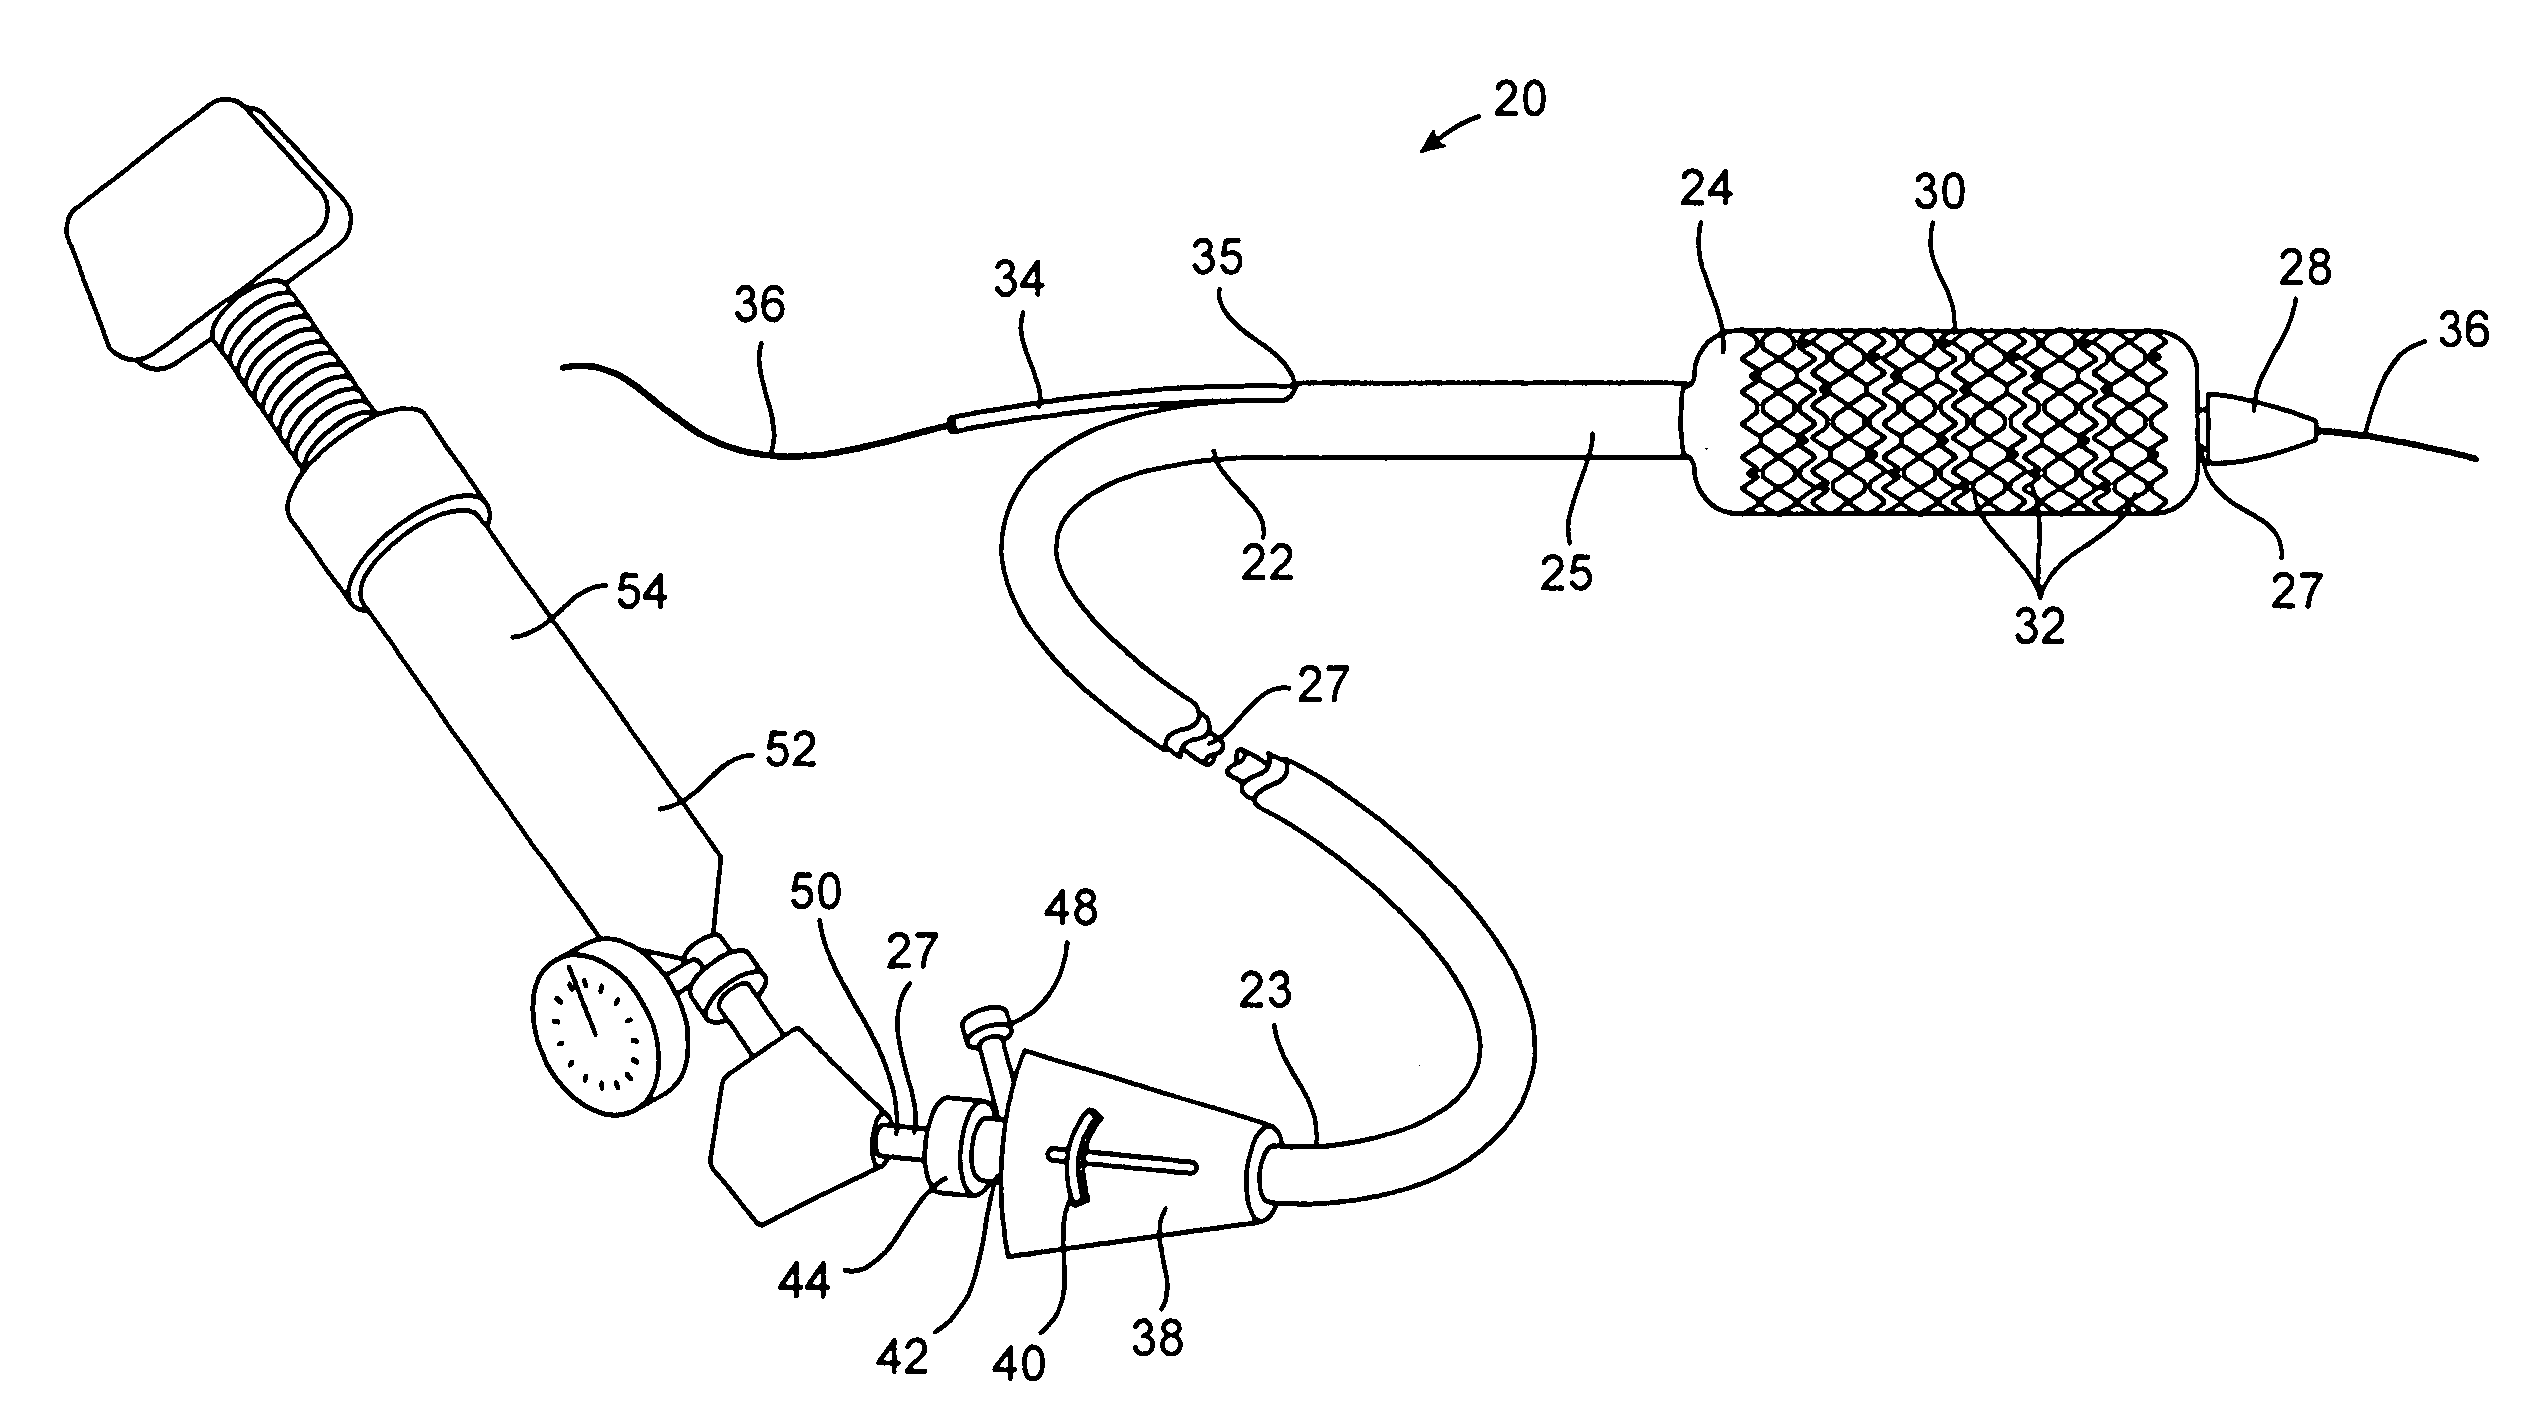 Apparatus and methods for positioning prostheses for deployment from a catheter